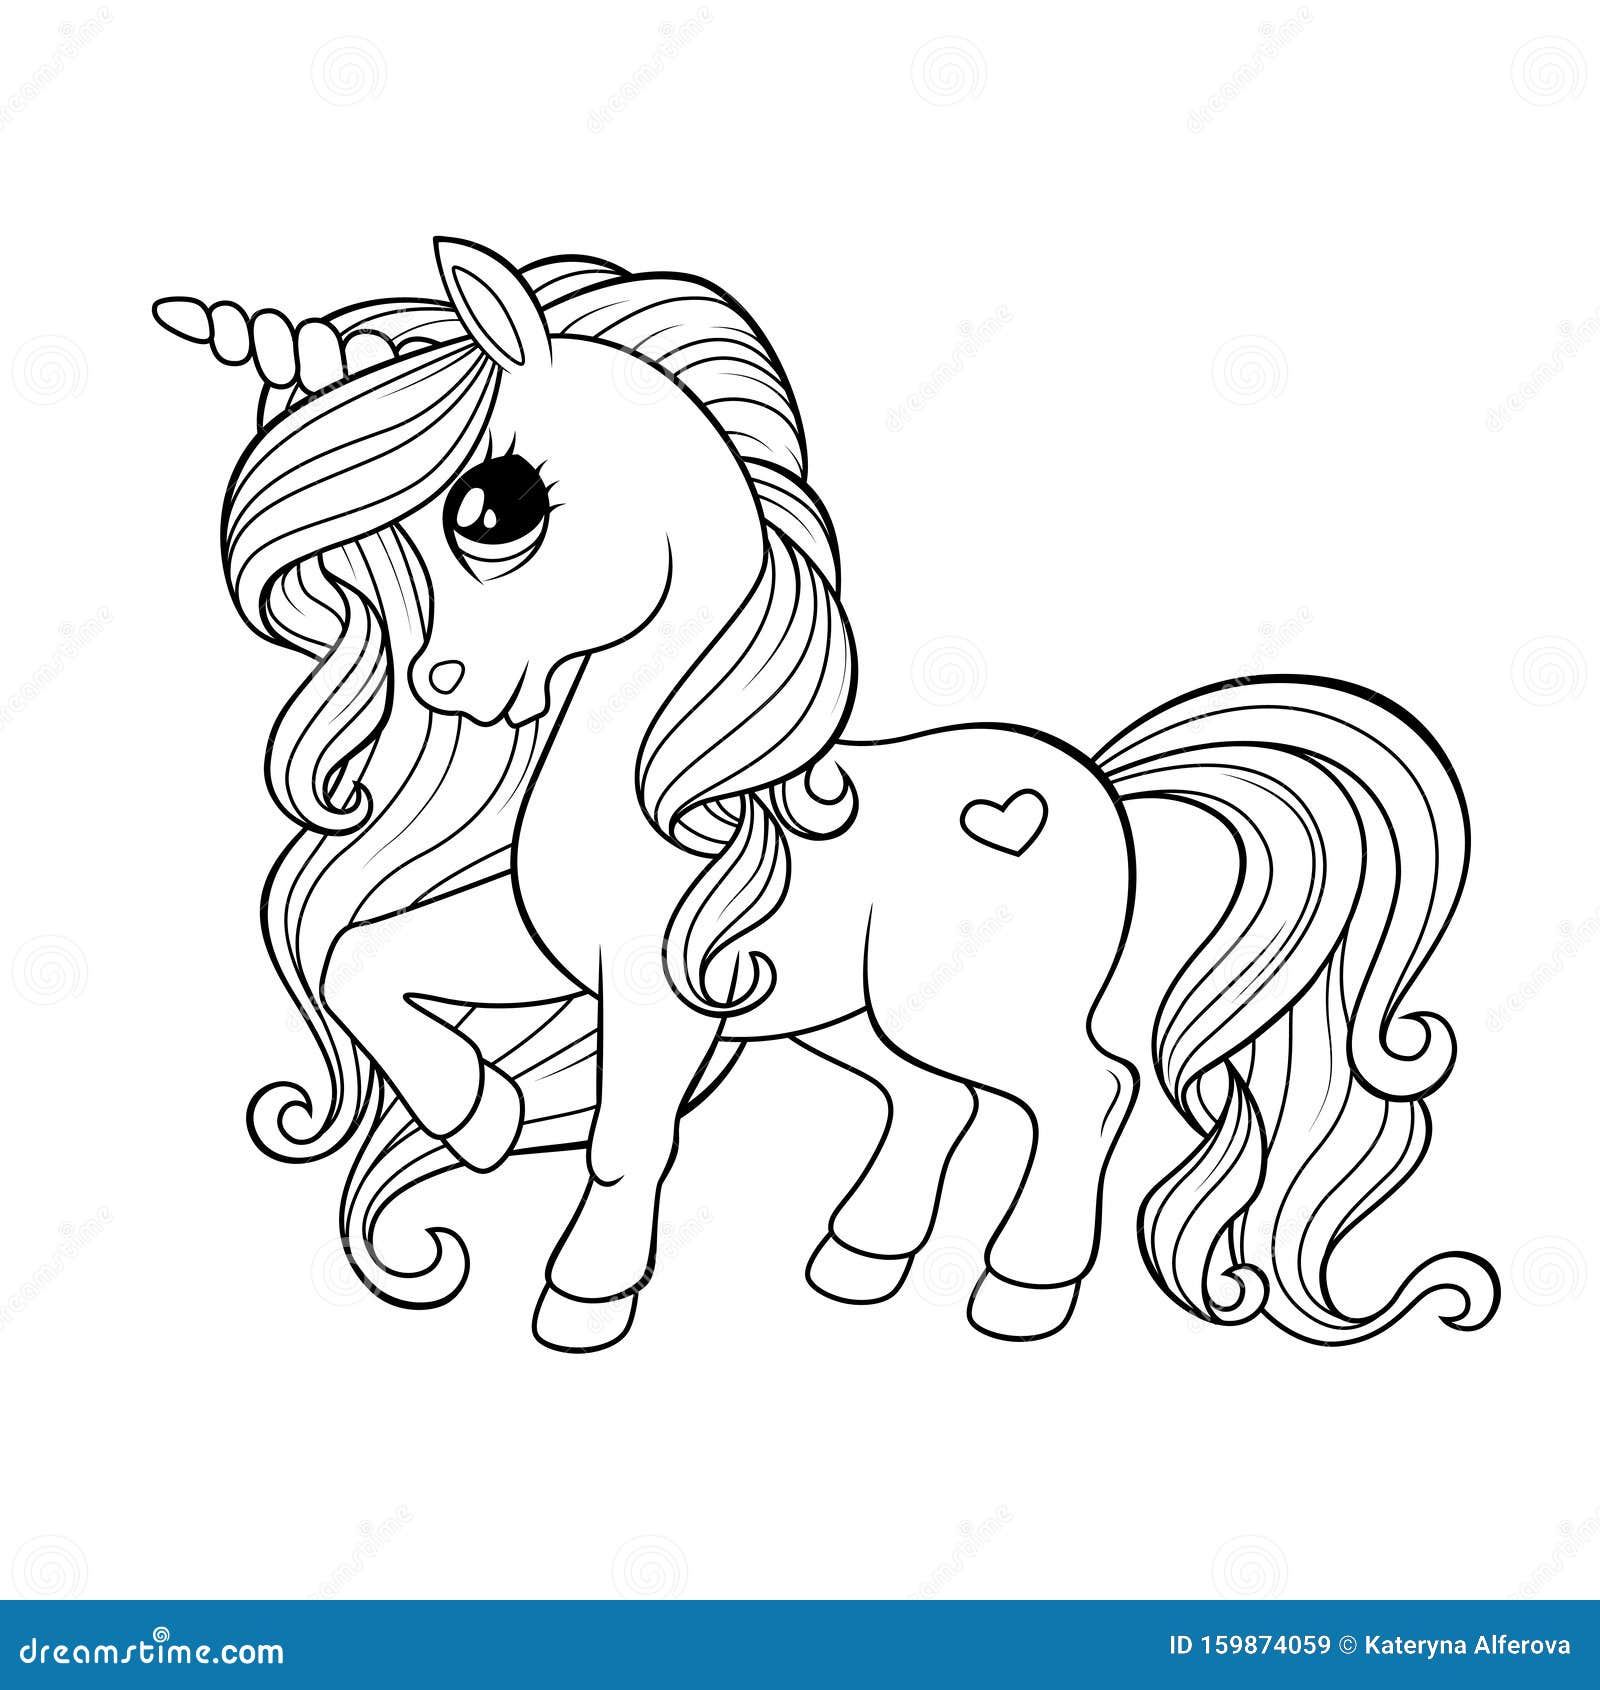 Cute Little Unicorn. Black and White Illustration for Coloring ...